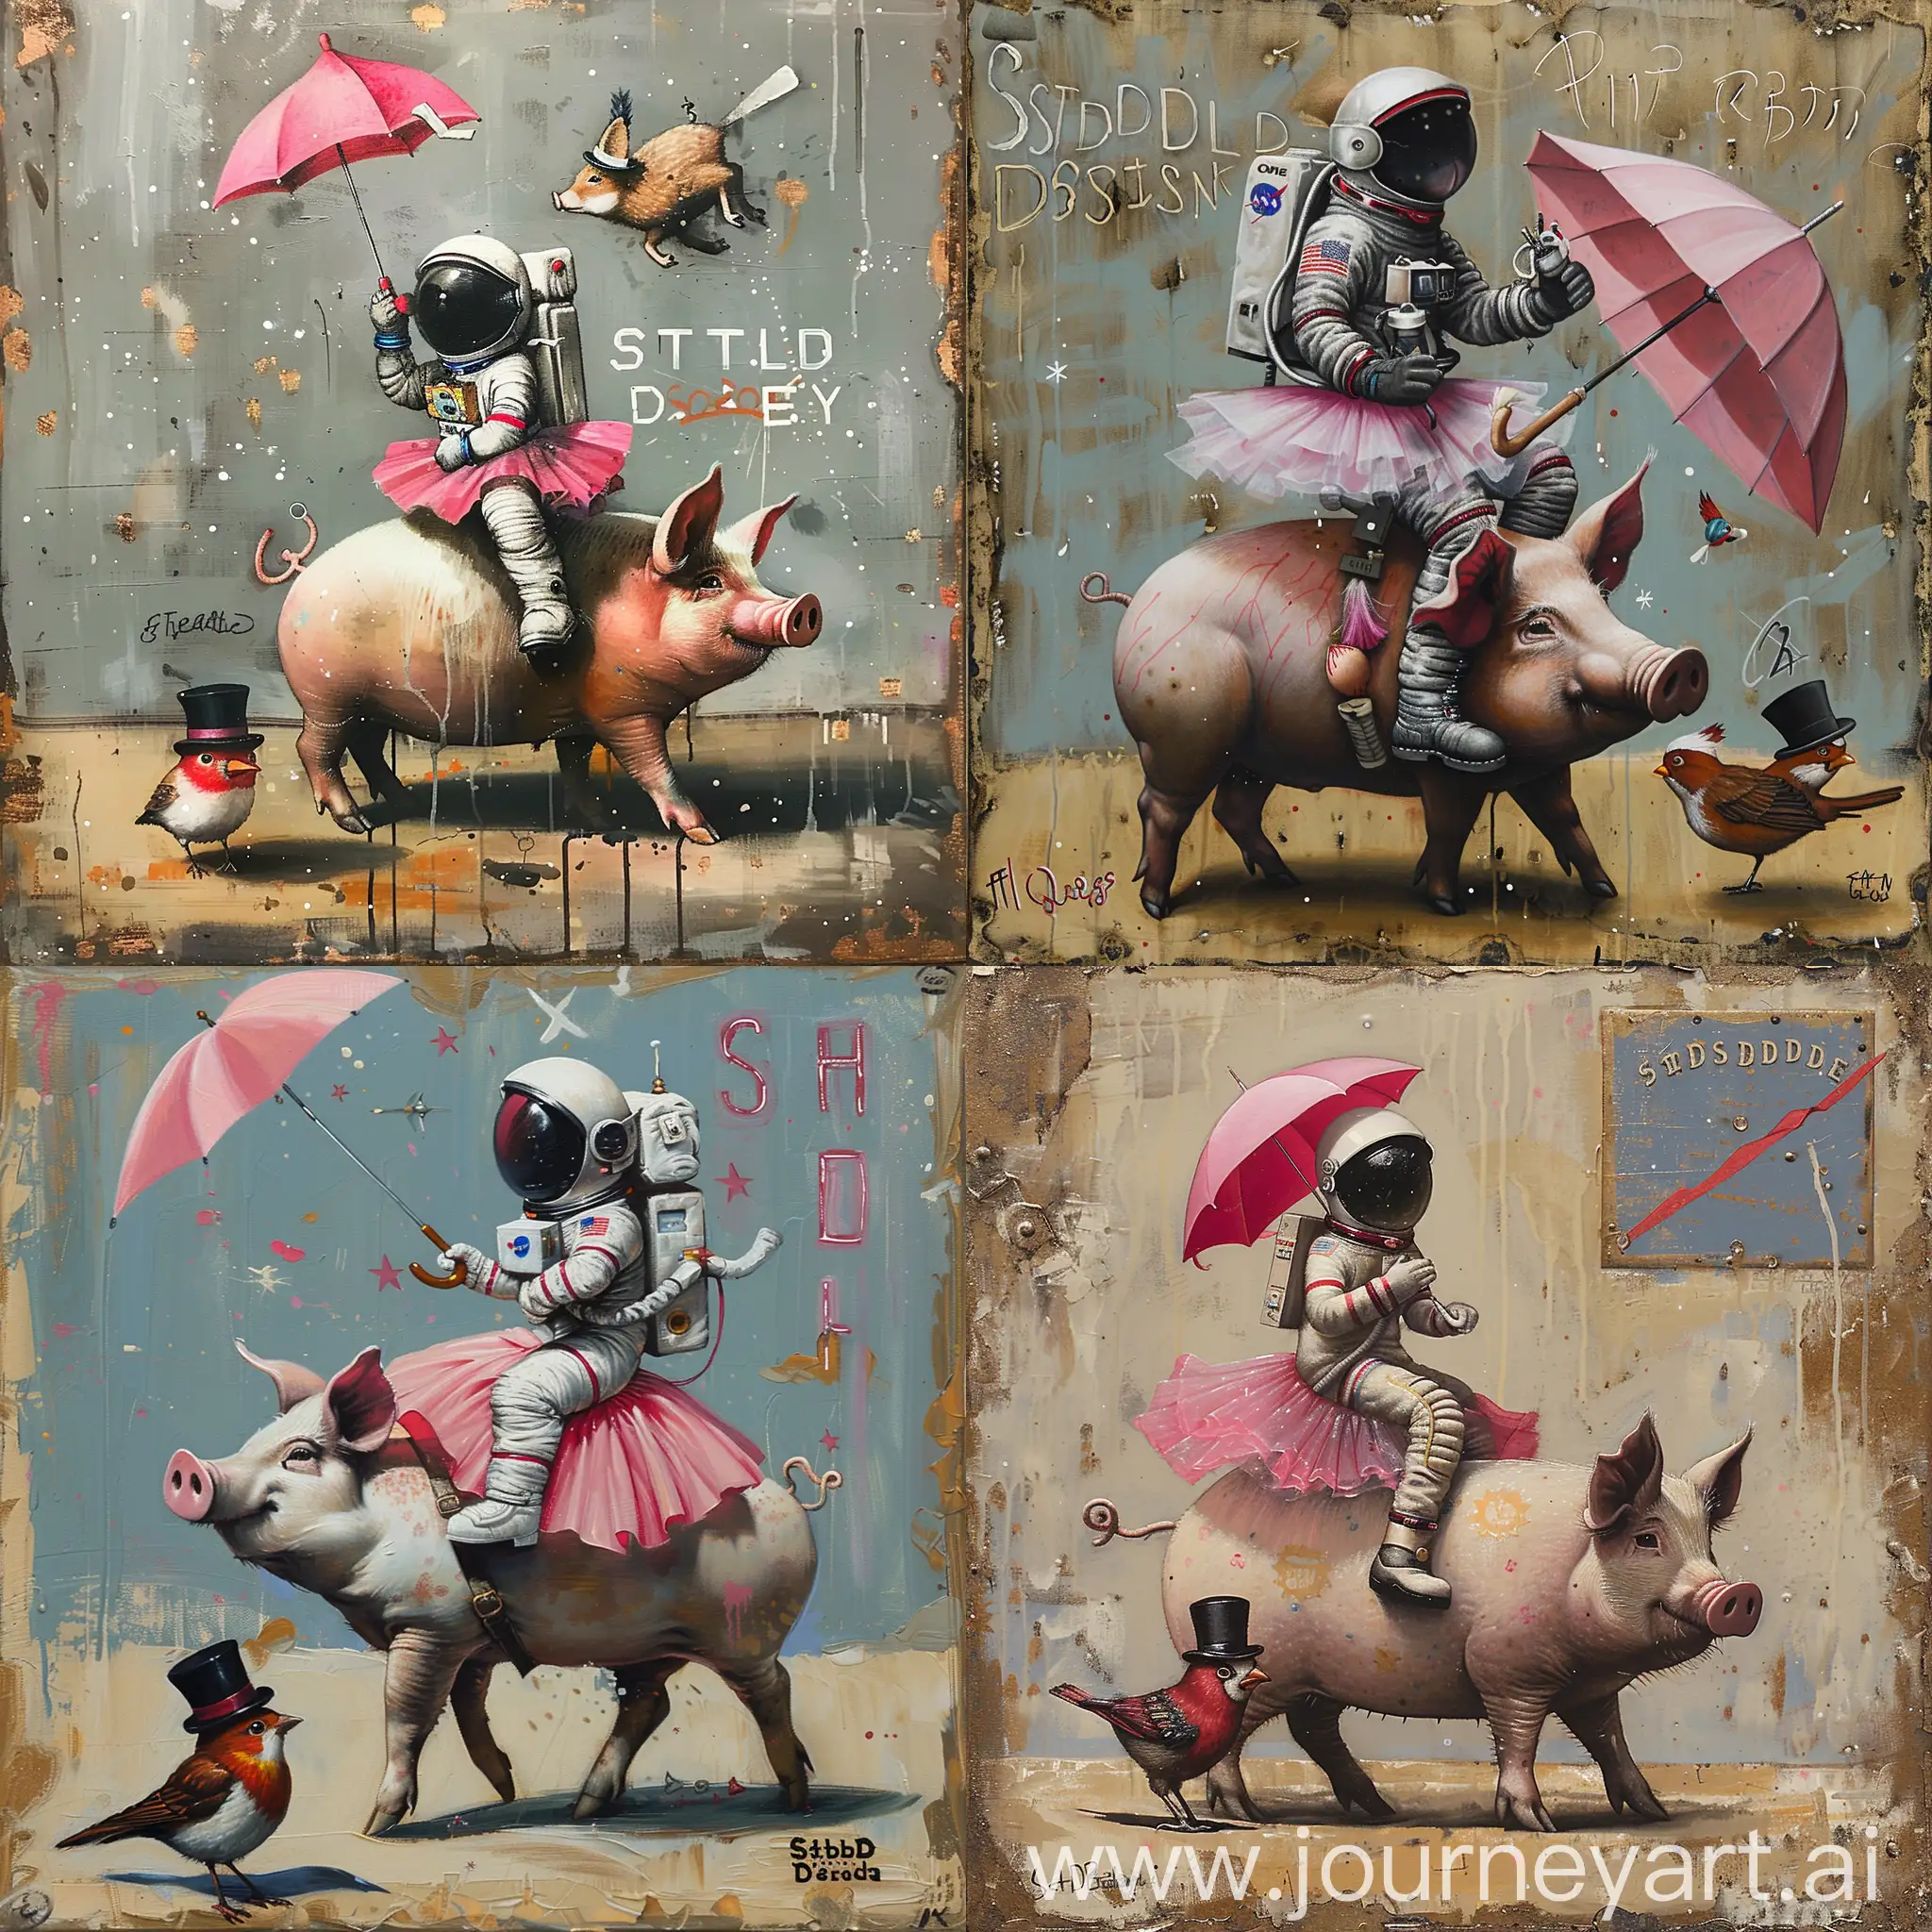 A painting of an astronaut riding a pig wearing a tutu holding a pink umbrella, on the ground next to the pig is a robin bird wearing a top hat, in the corner are the words ‘stable diffusion